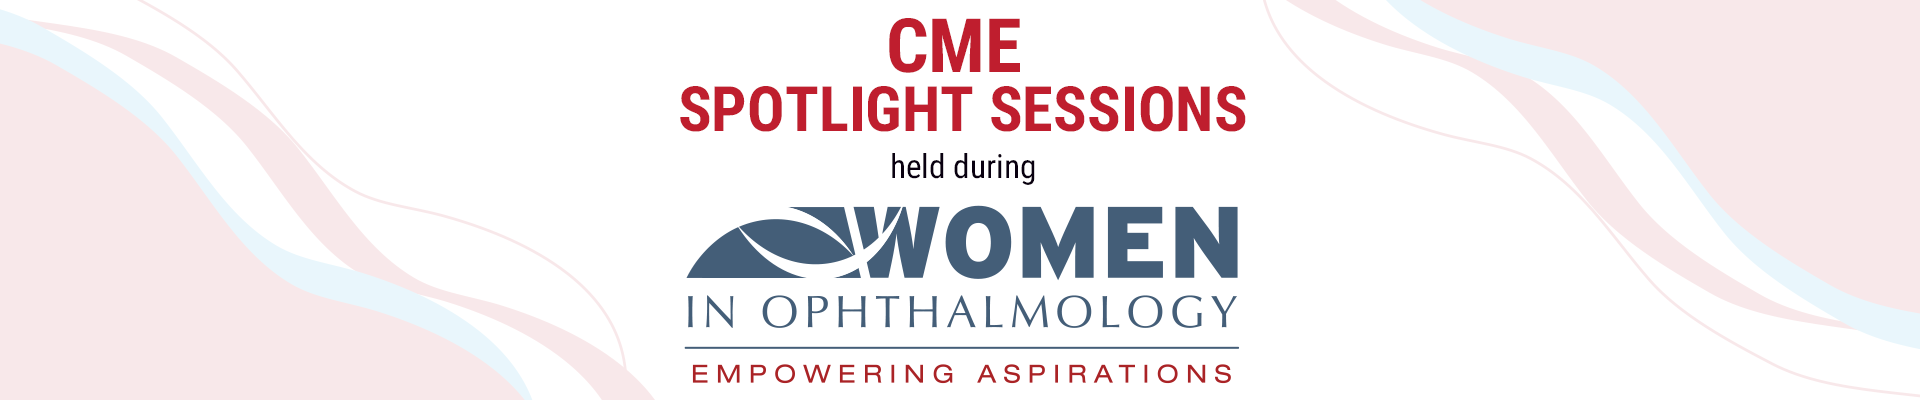 CME Spotlight Sessions held during Women in Ophthalmology Summer Symposium